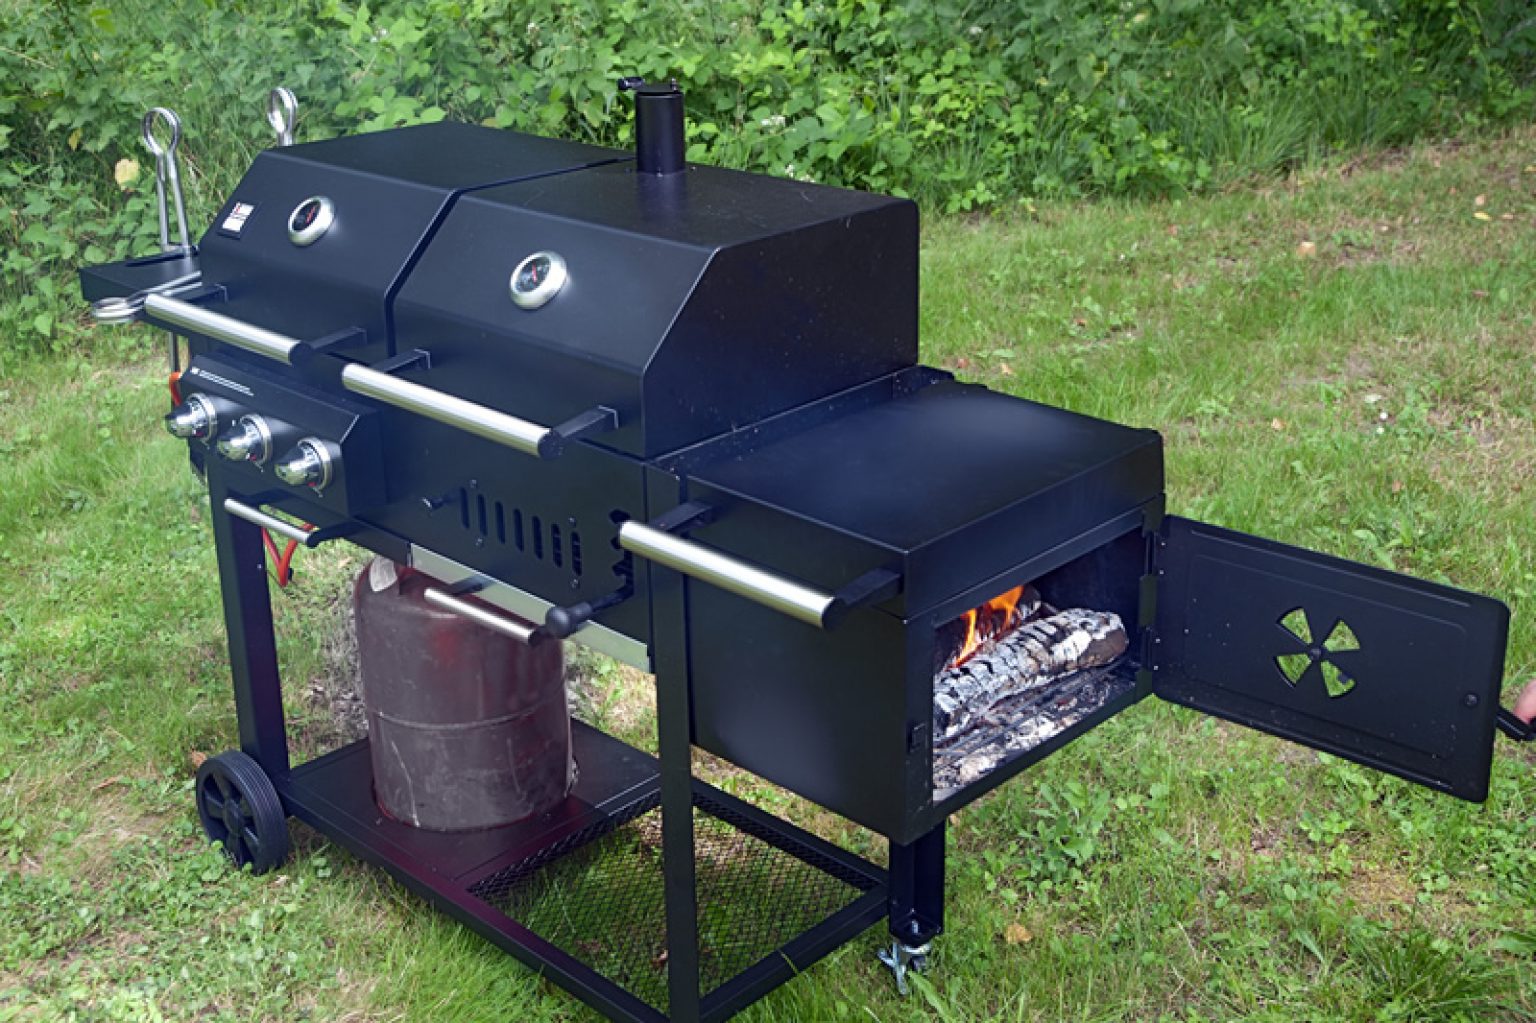 10 Best Smoker Grills In 2022 (Unbiased Reviews & Buying Guide)